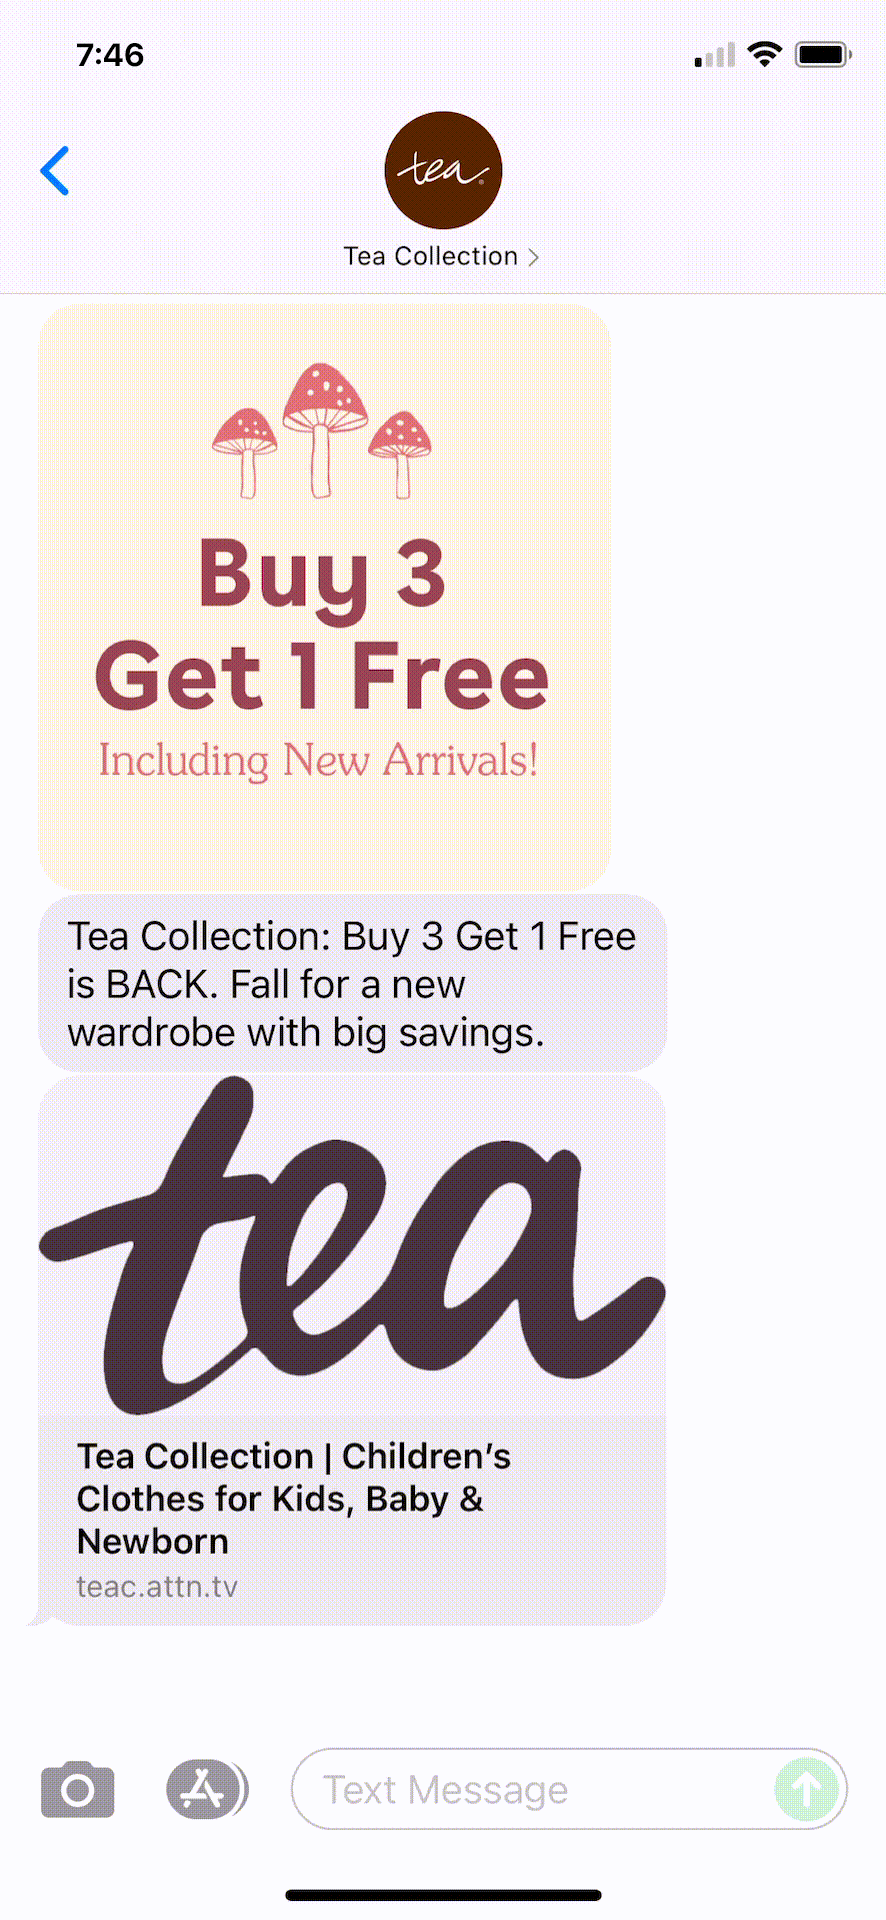 Tea-Collection-Text-Message-Marketing-Example-09.10.2021